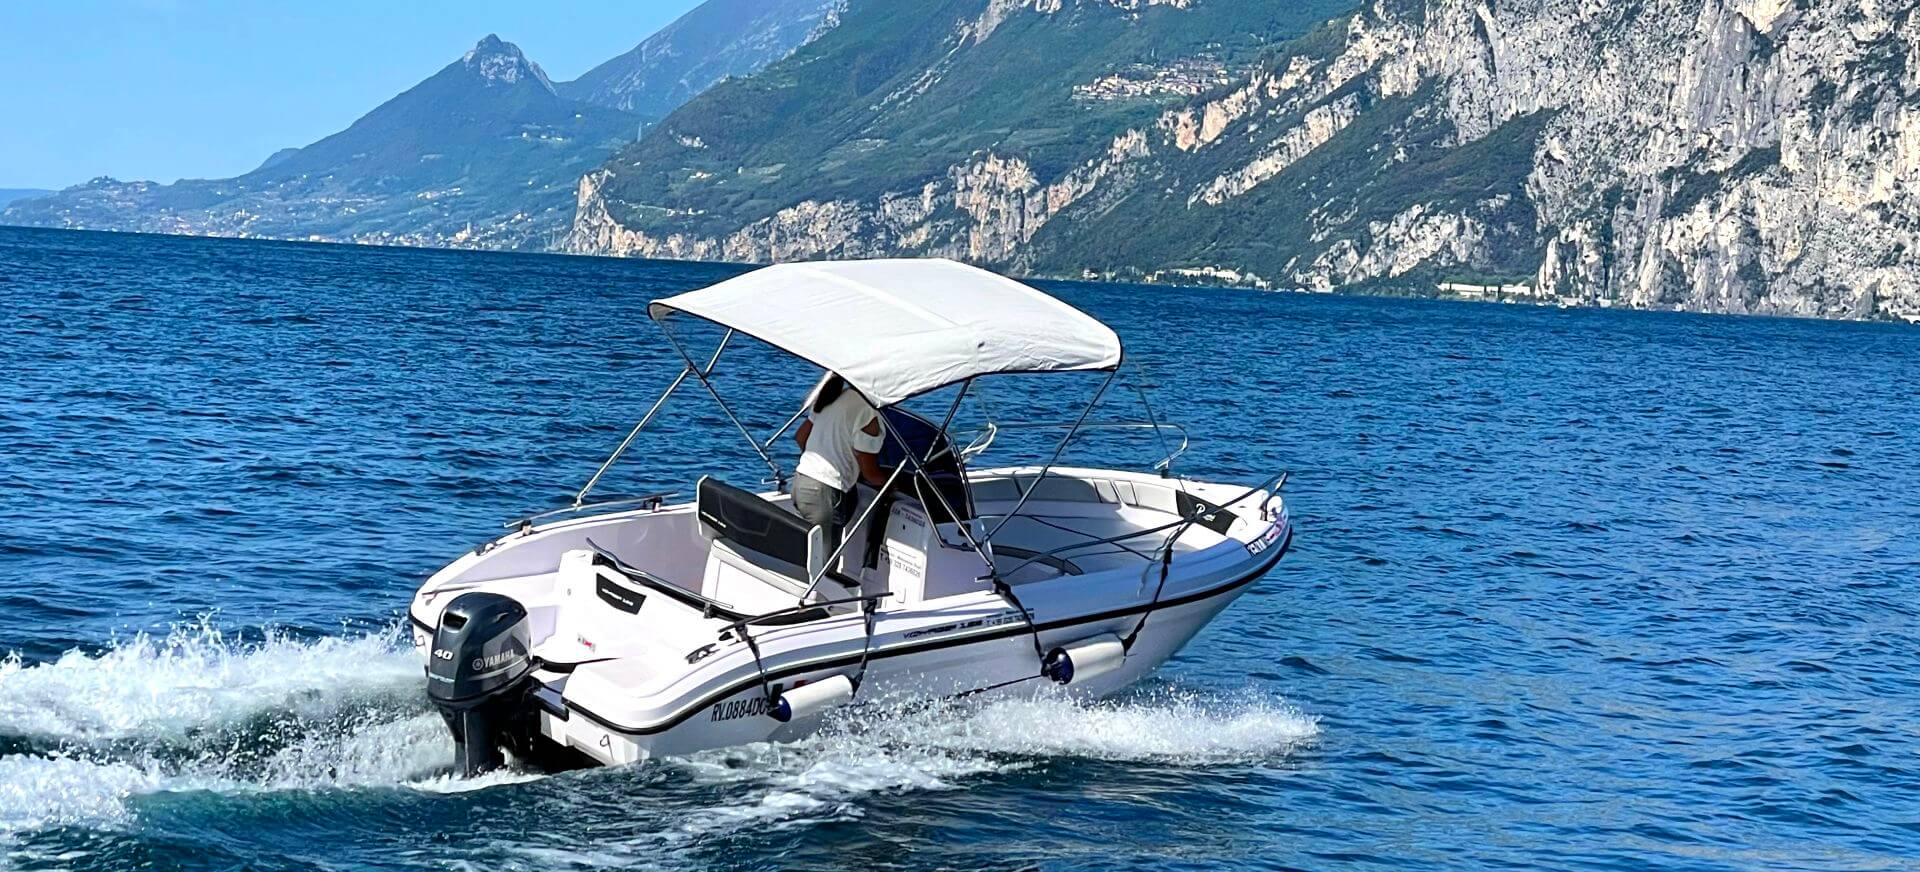 Motorboats for hire on Lake Garda